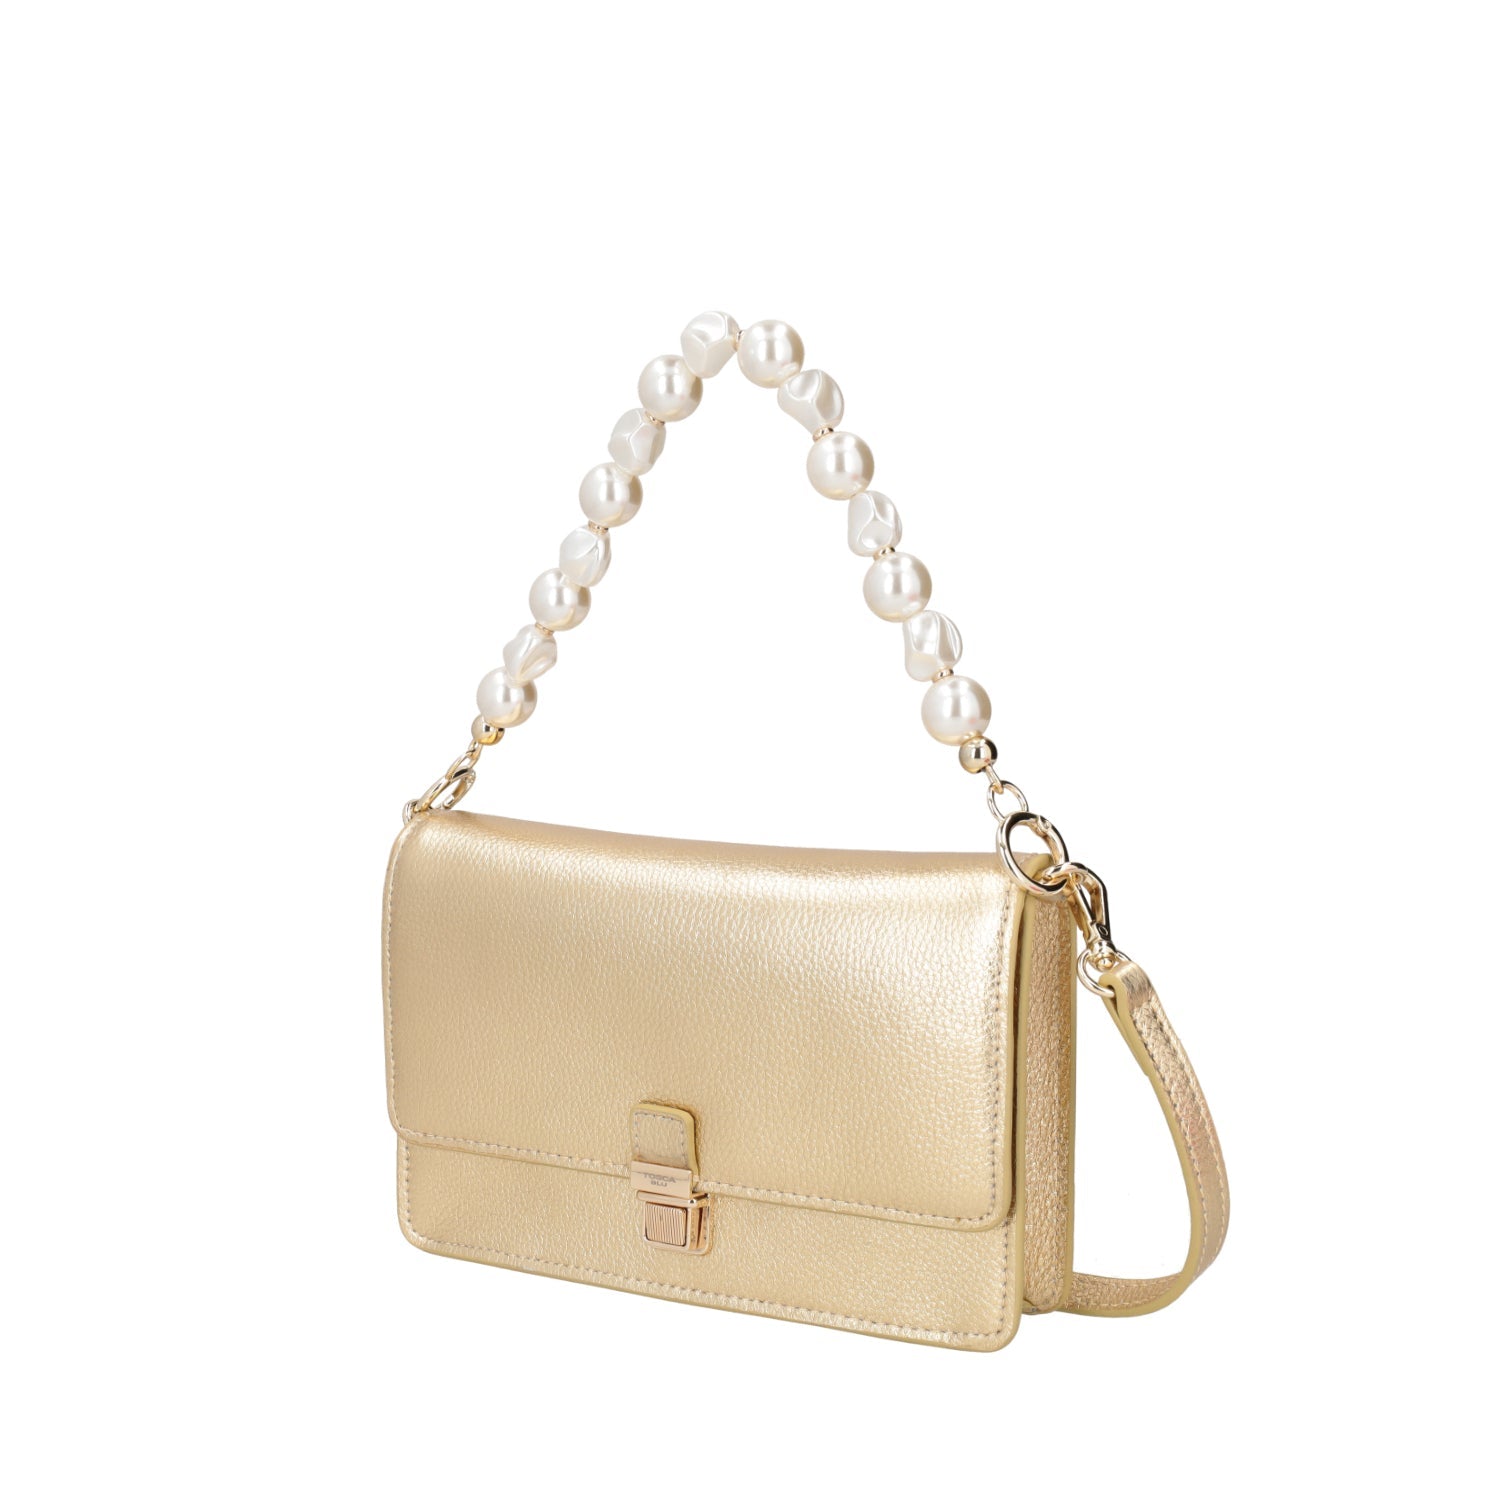 GOLD GIN TONIC LEATHER BAG